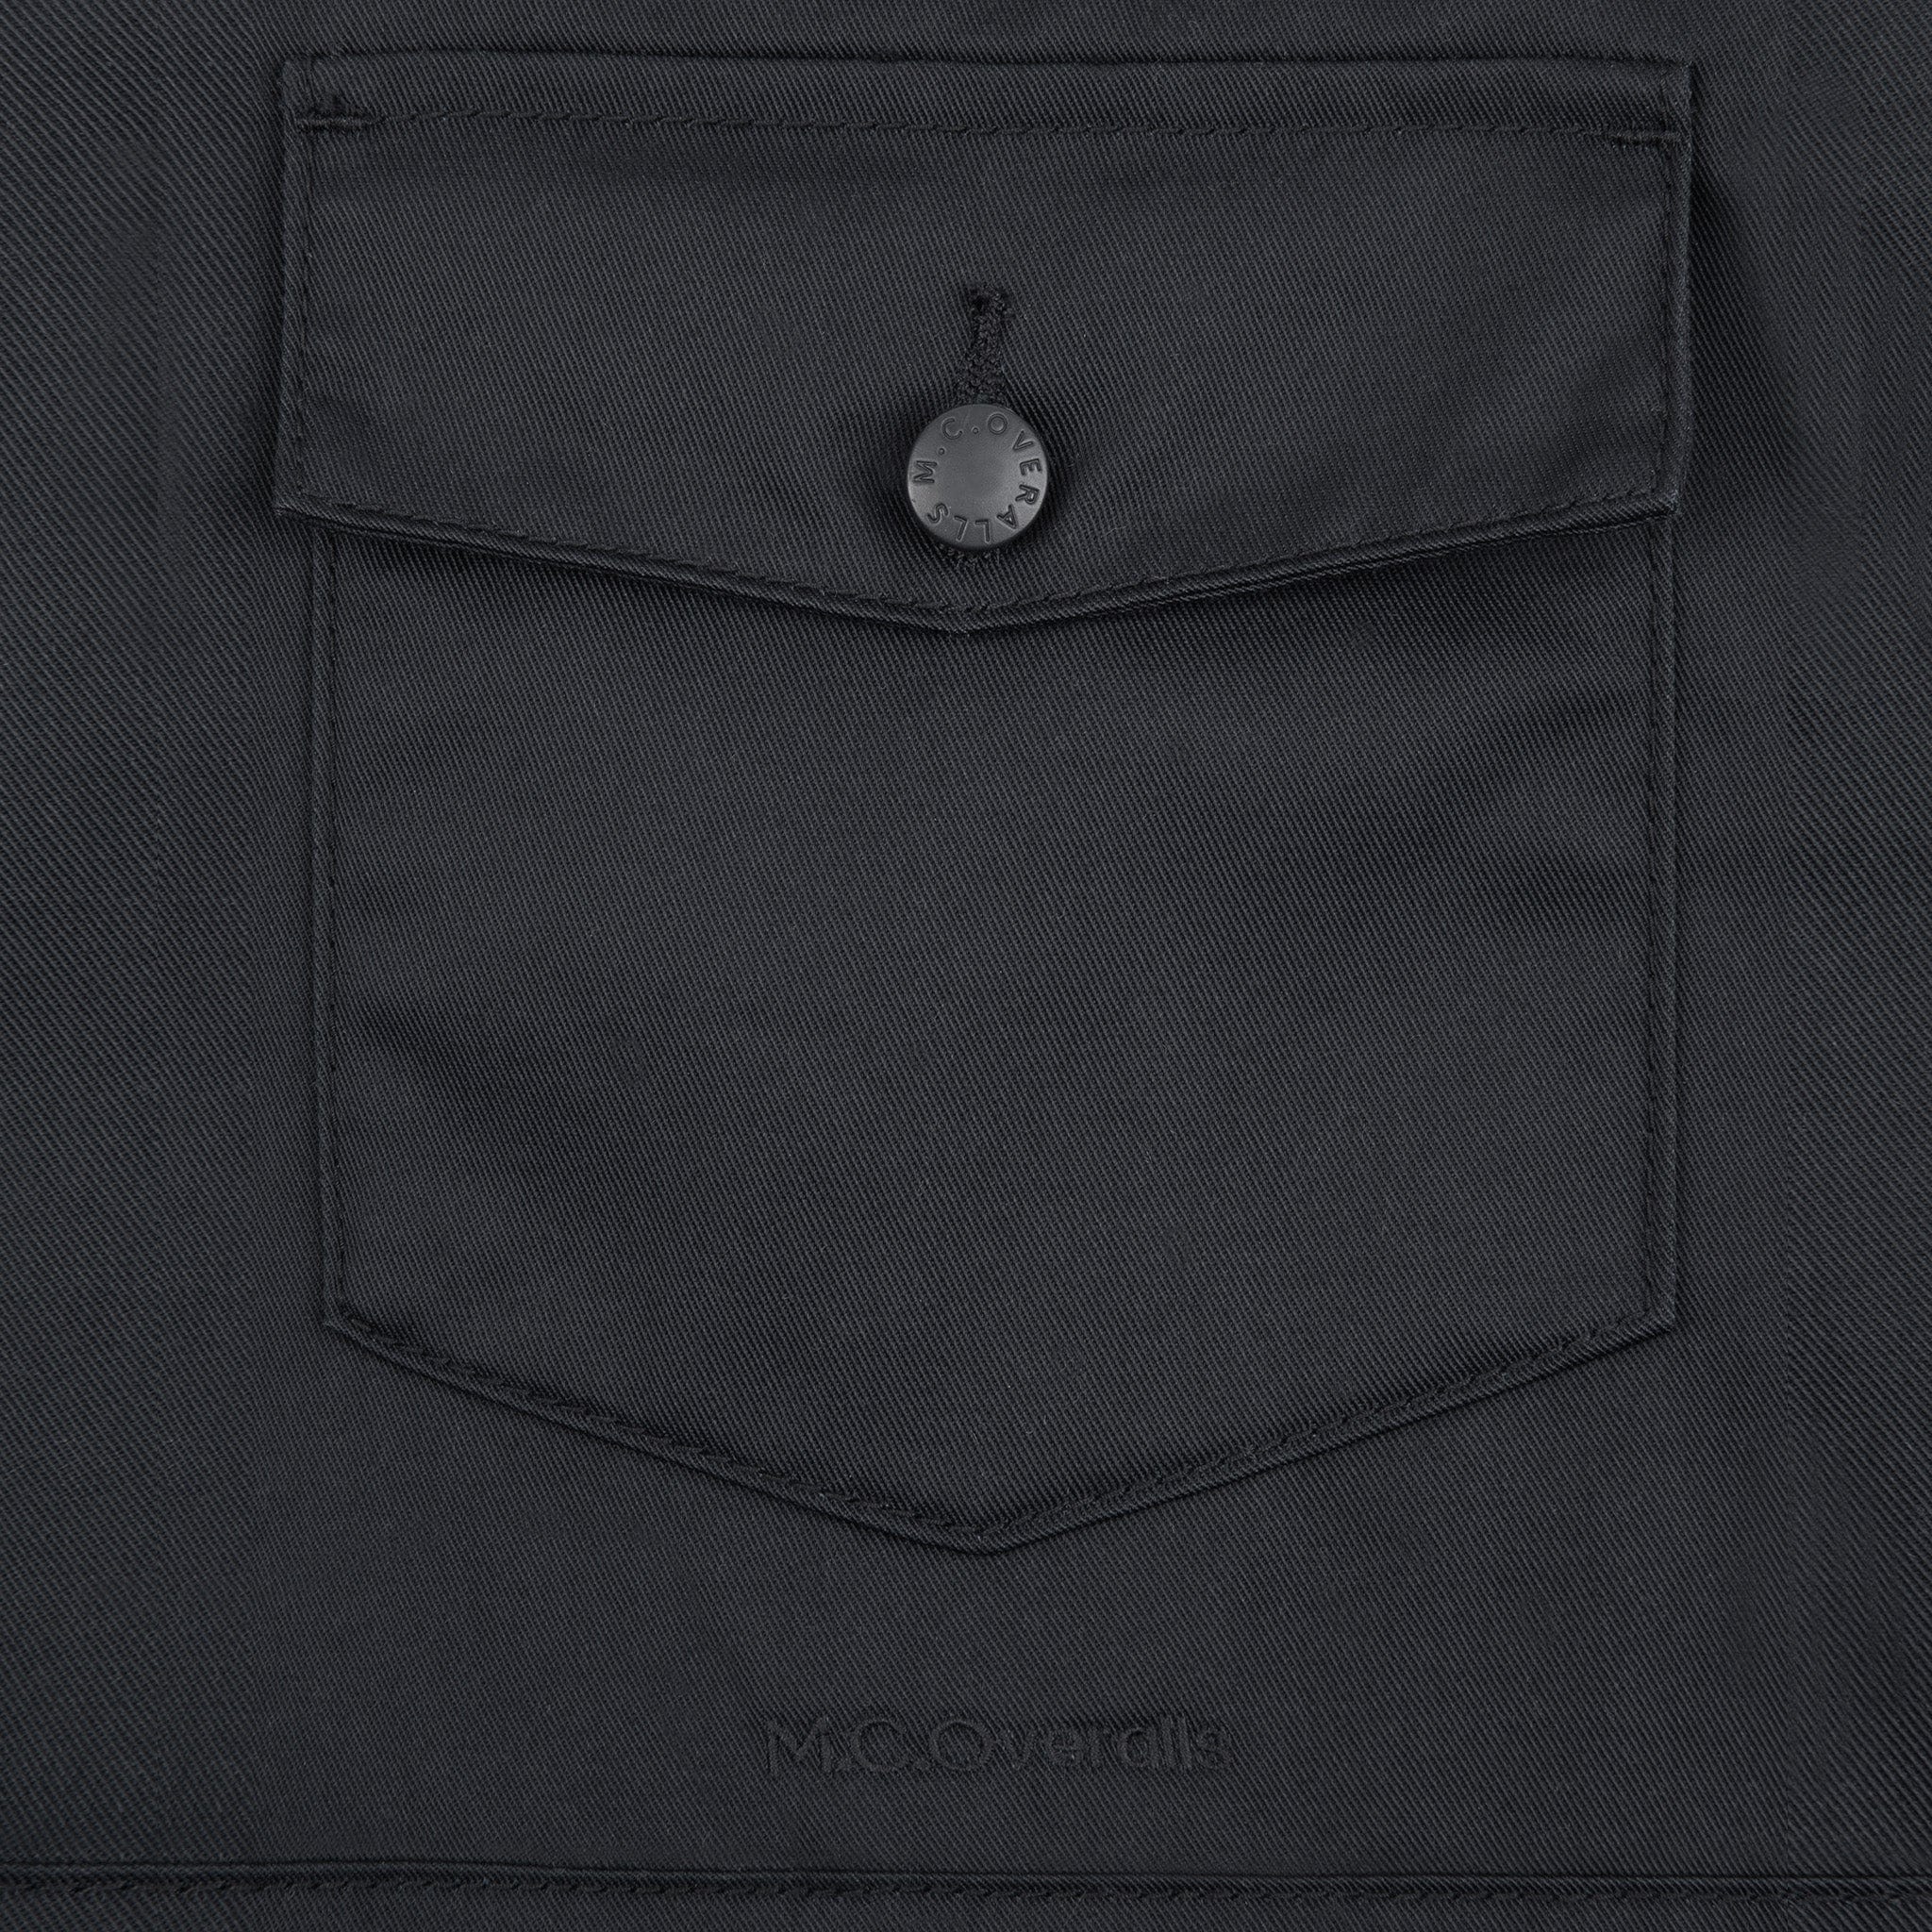 M.C.O&#39;s Logo Situated Below the Pocket of Black Polycotton Dungarees.